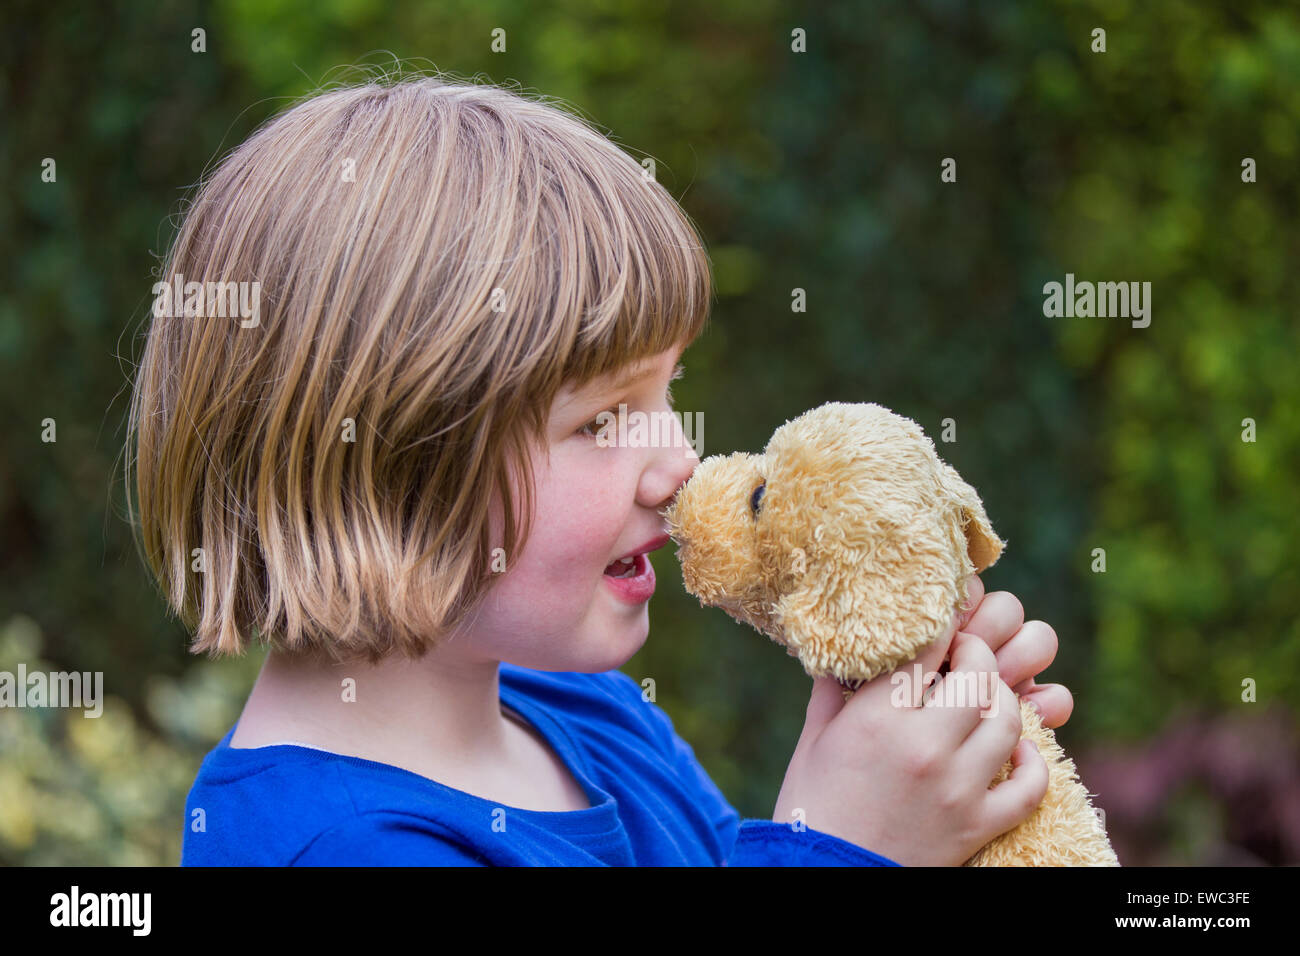 young caucasian girl hugging stuffed dog against her nose Stock Photo